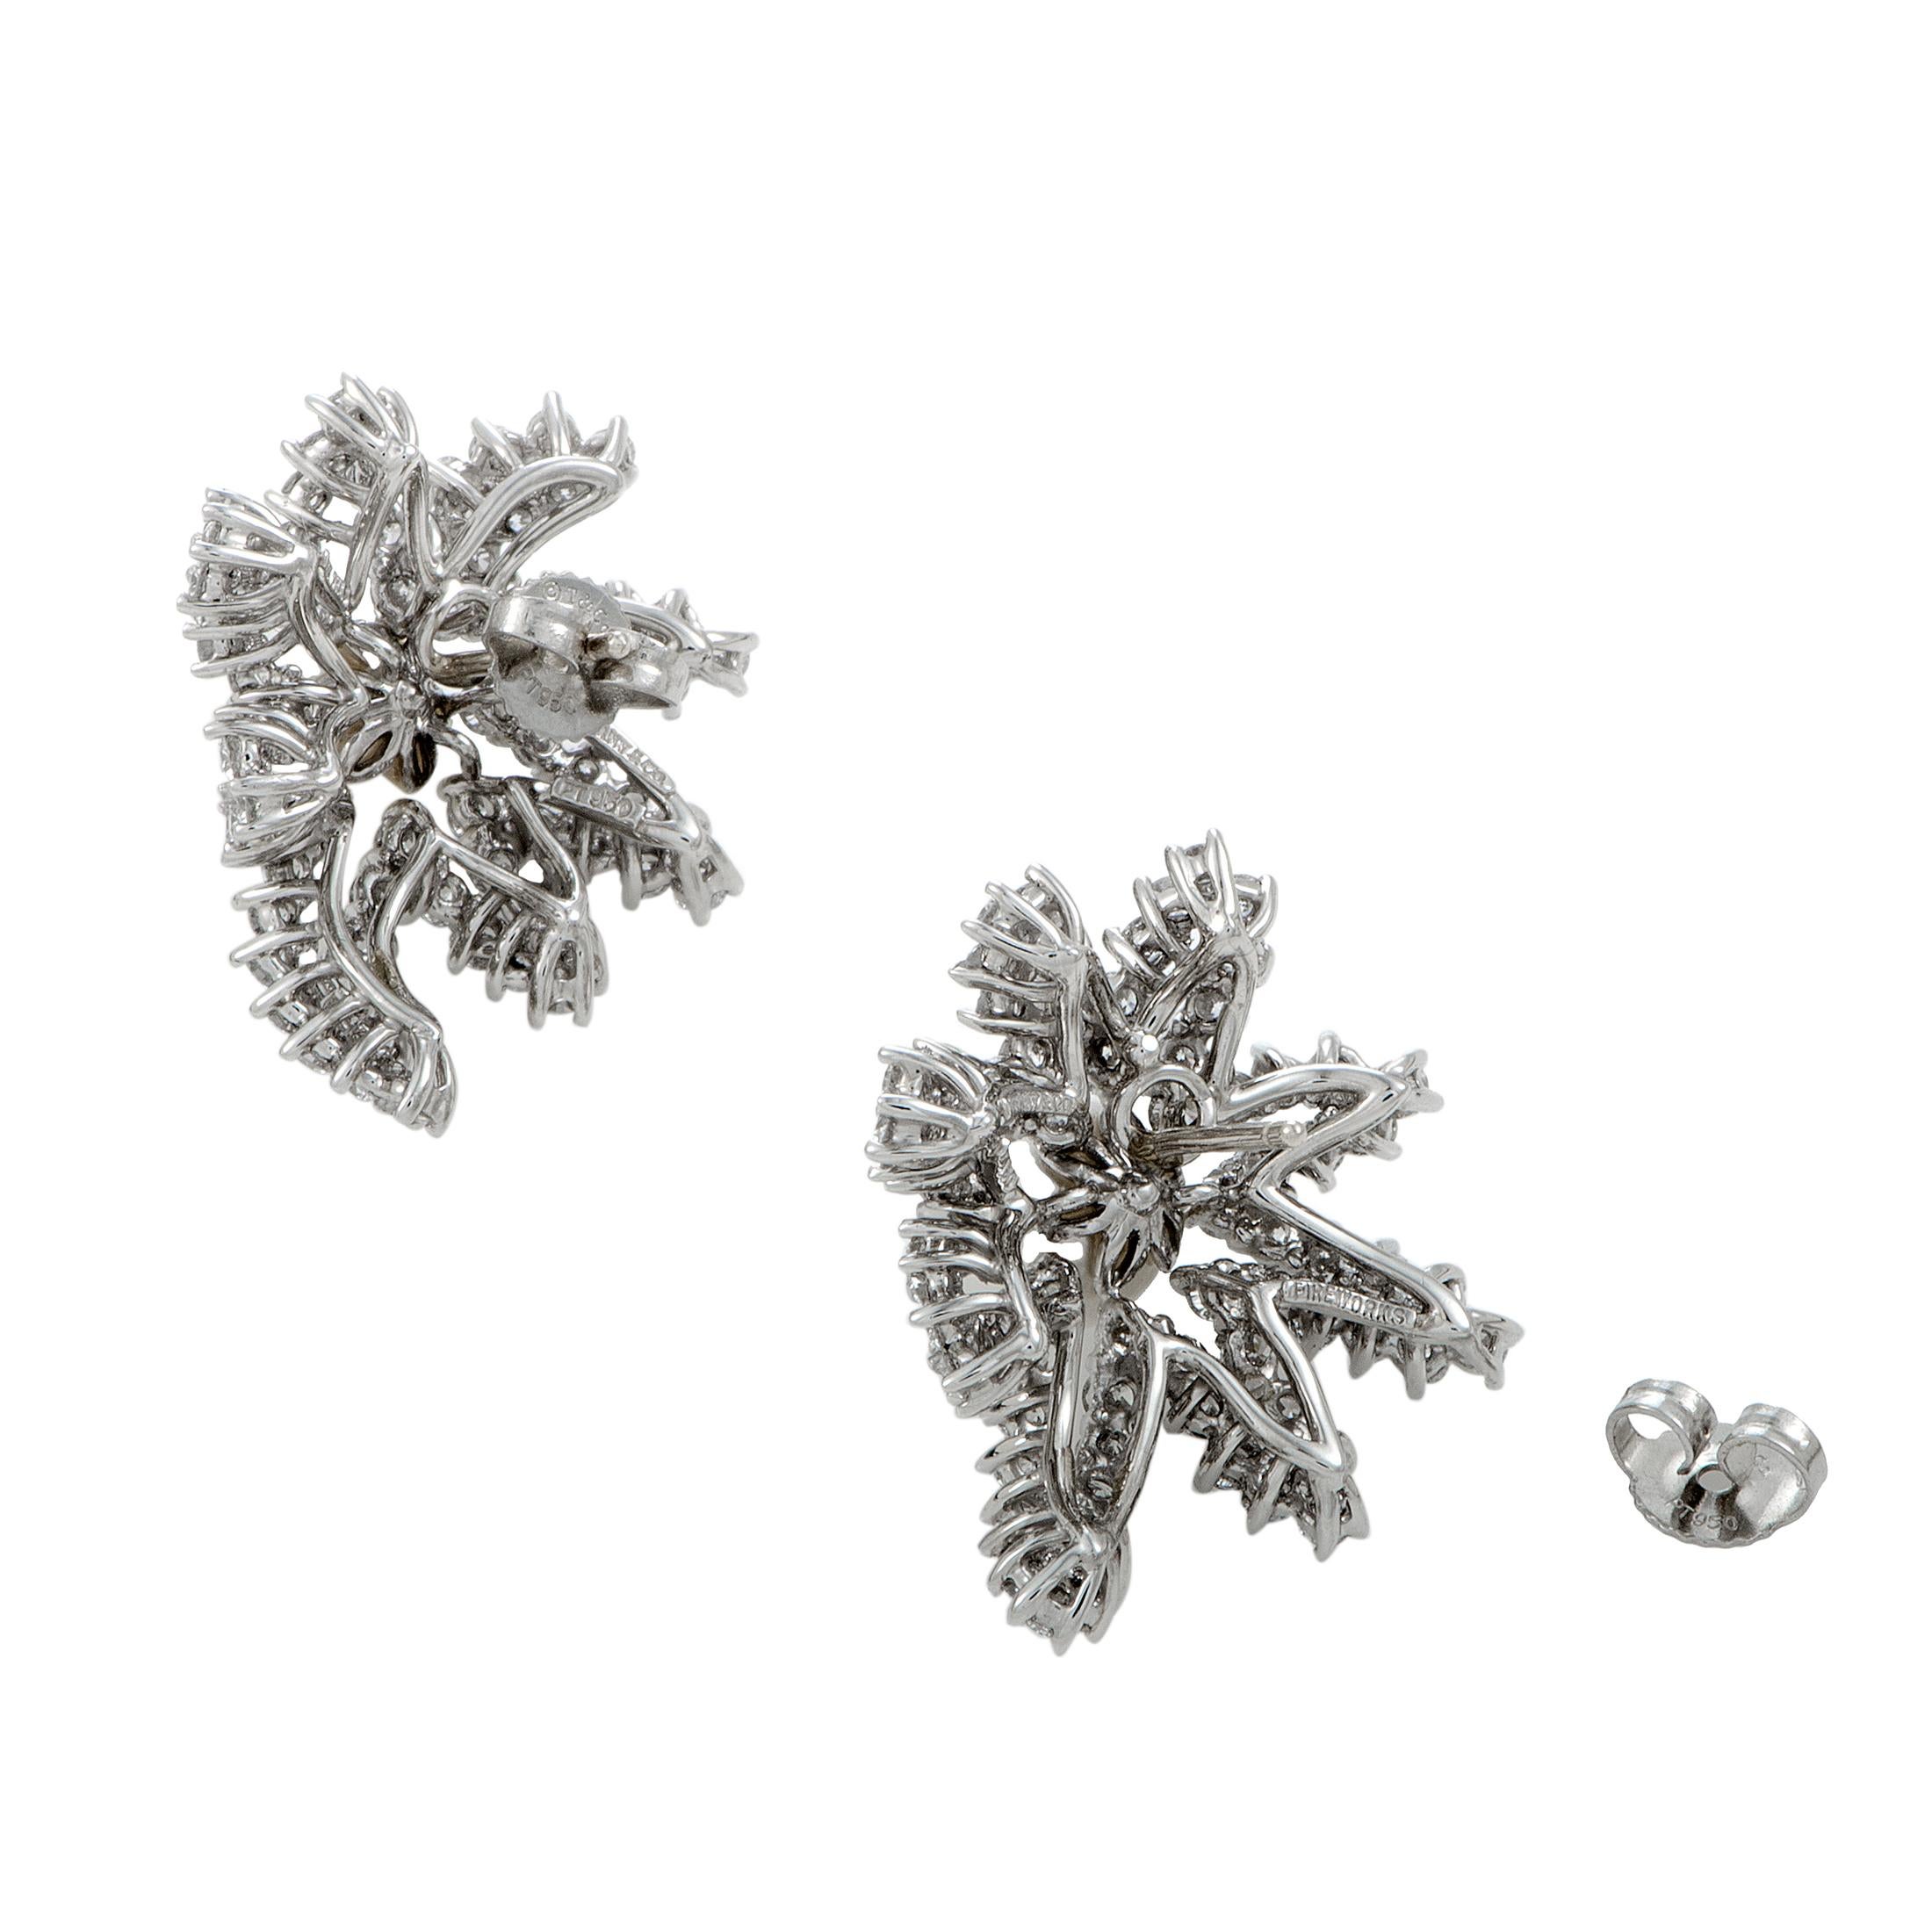 Add a luxe touch of lustrous glisten to your ensembles with these fascinating platinum earrings that are presented by Tiffany & Co. within the compelling “Fireworks” collection. The pair is embellished with sublime pearls and with dazzling diamonds